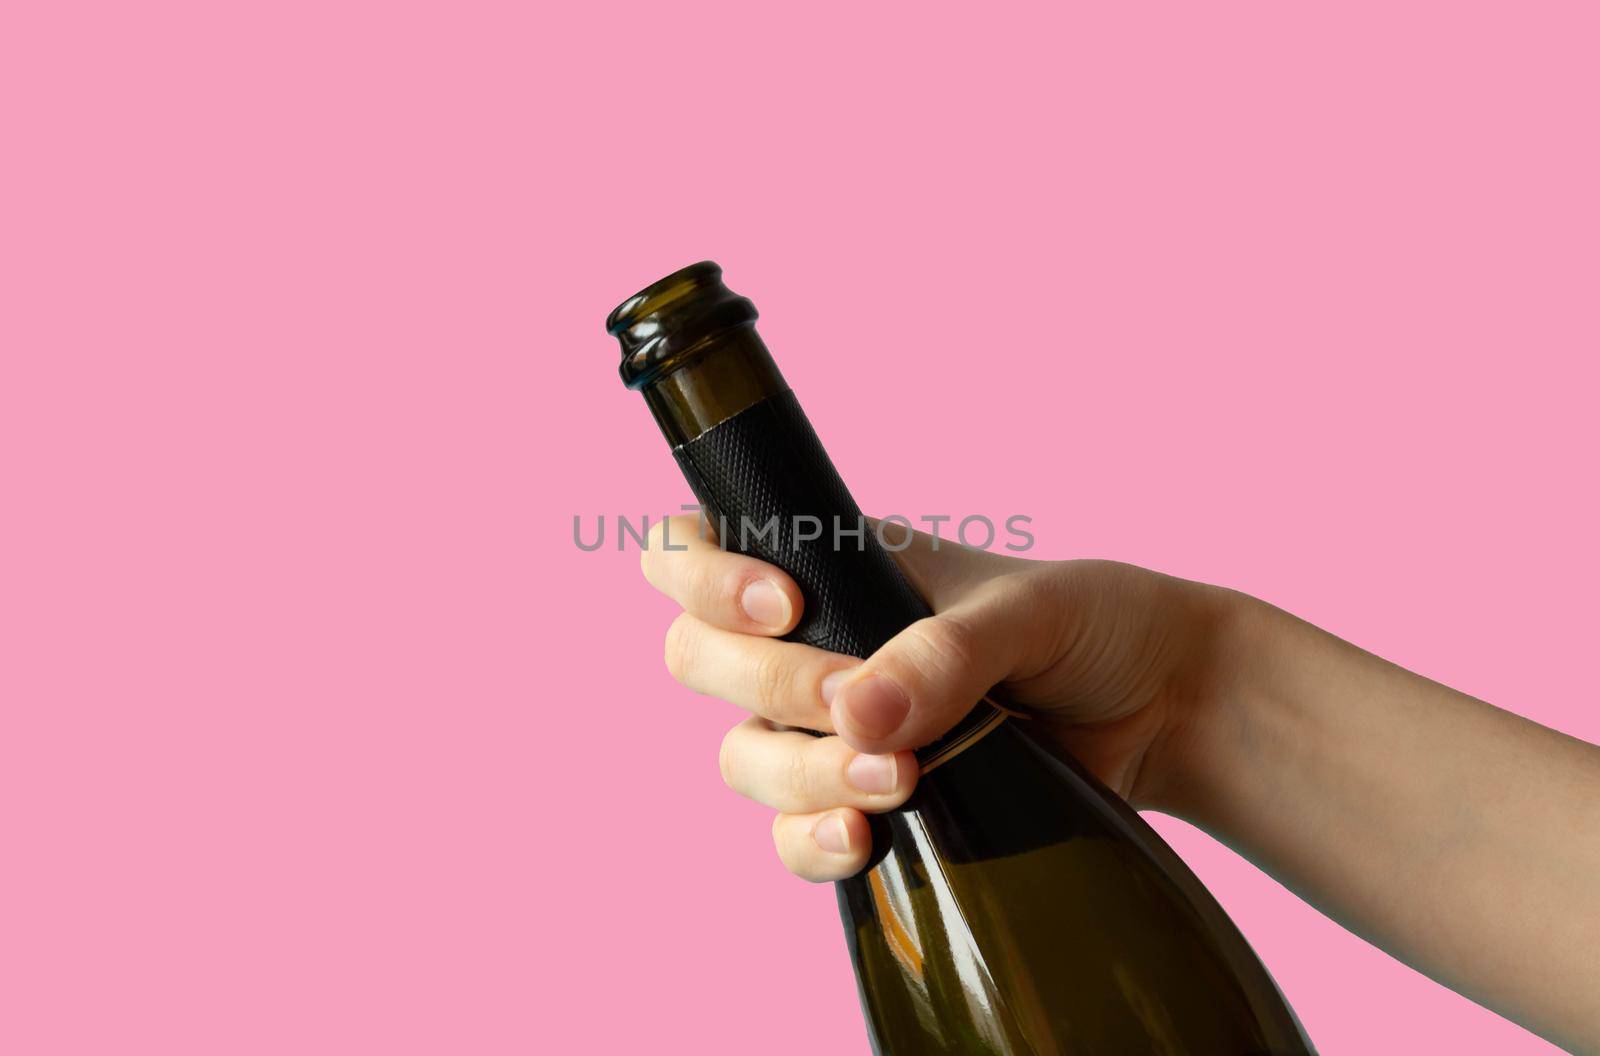 A woman's hand holding an open bottle of champagne on a pink background.